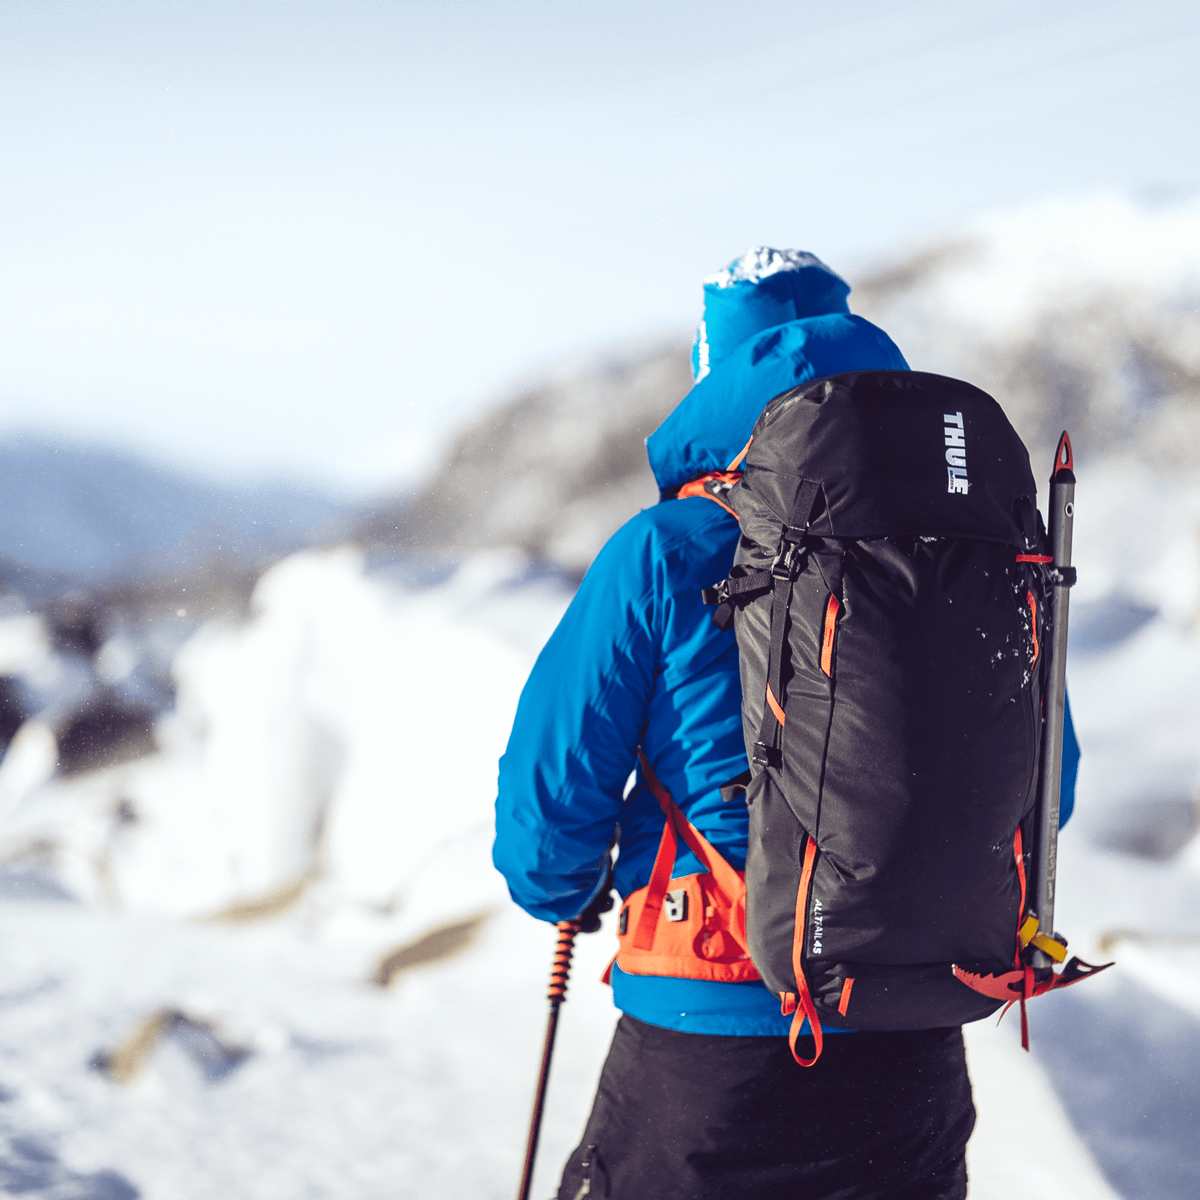 A man stands in the snowy mountains carrying a Thule AllTrail 45L backpack.